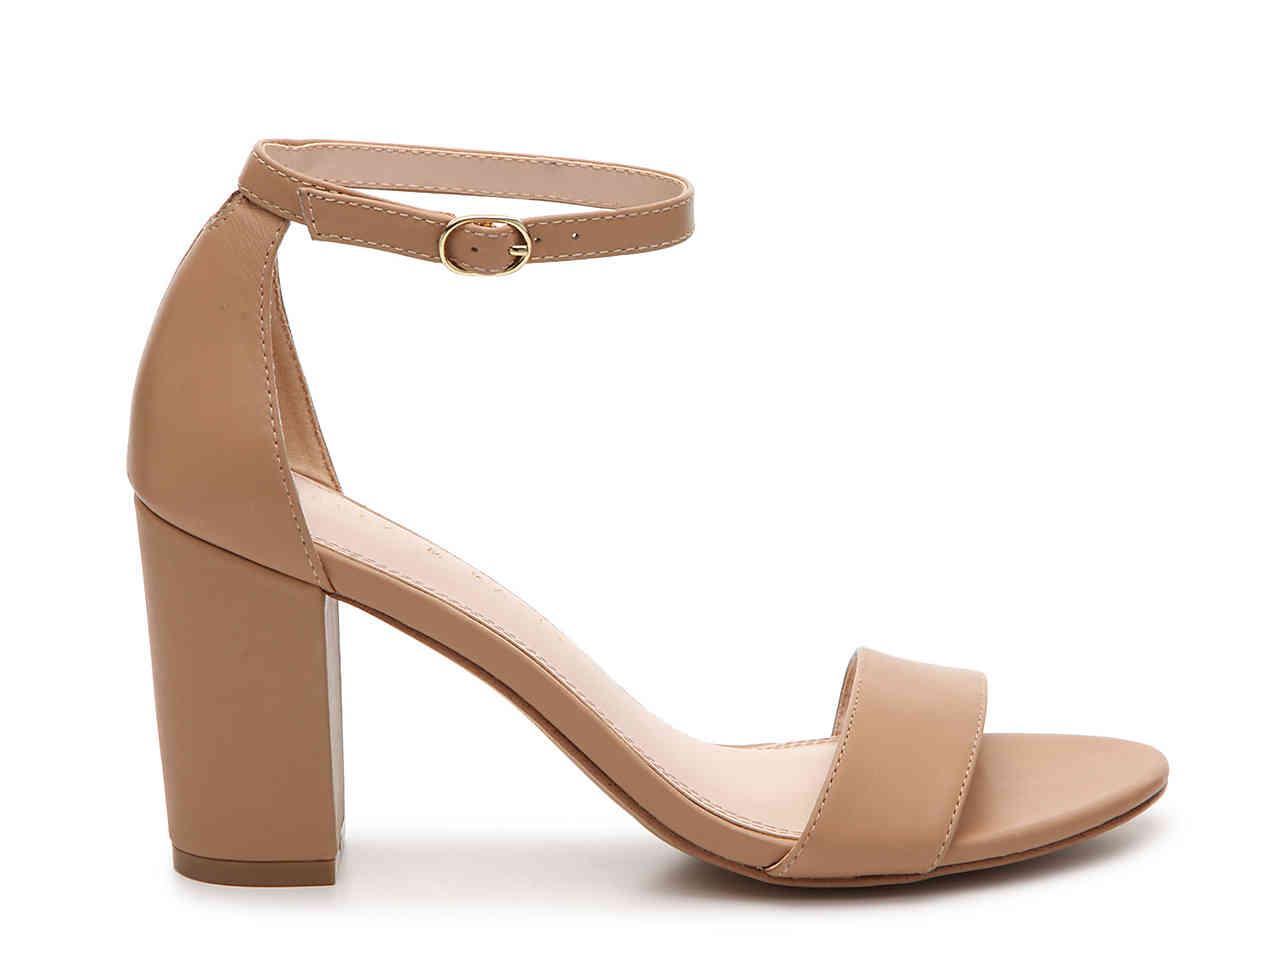 kelly and katie hailee sandal